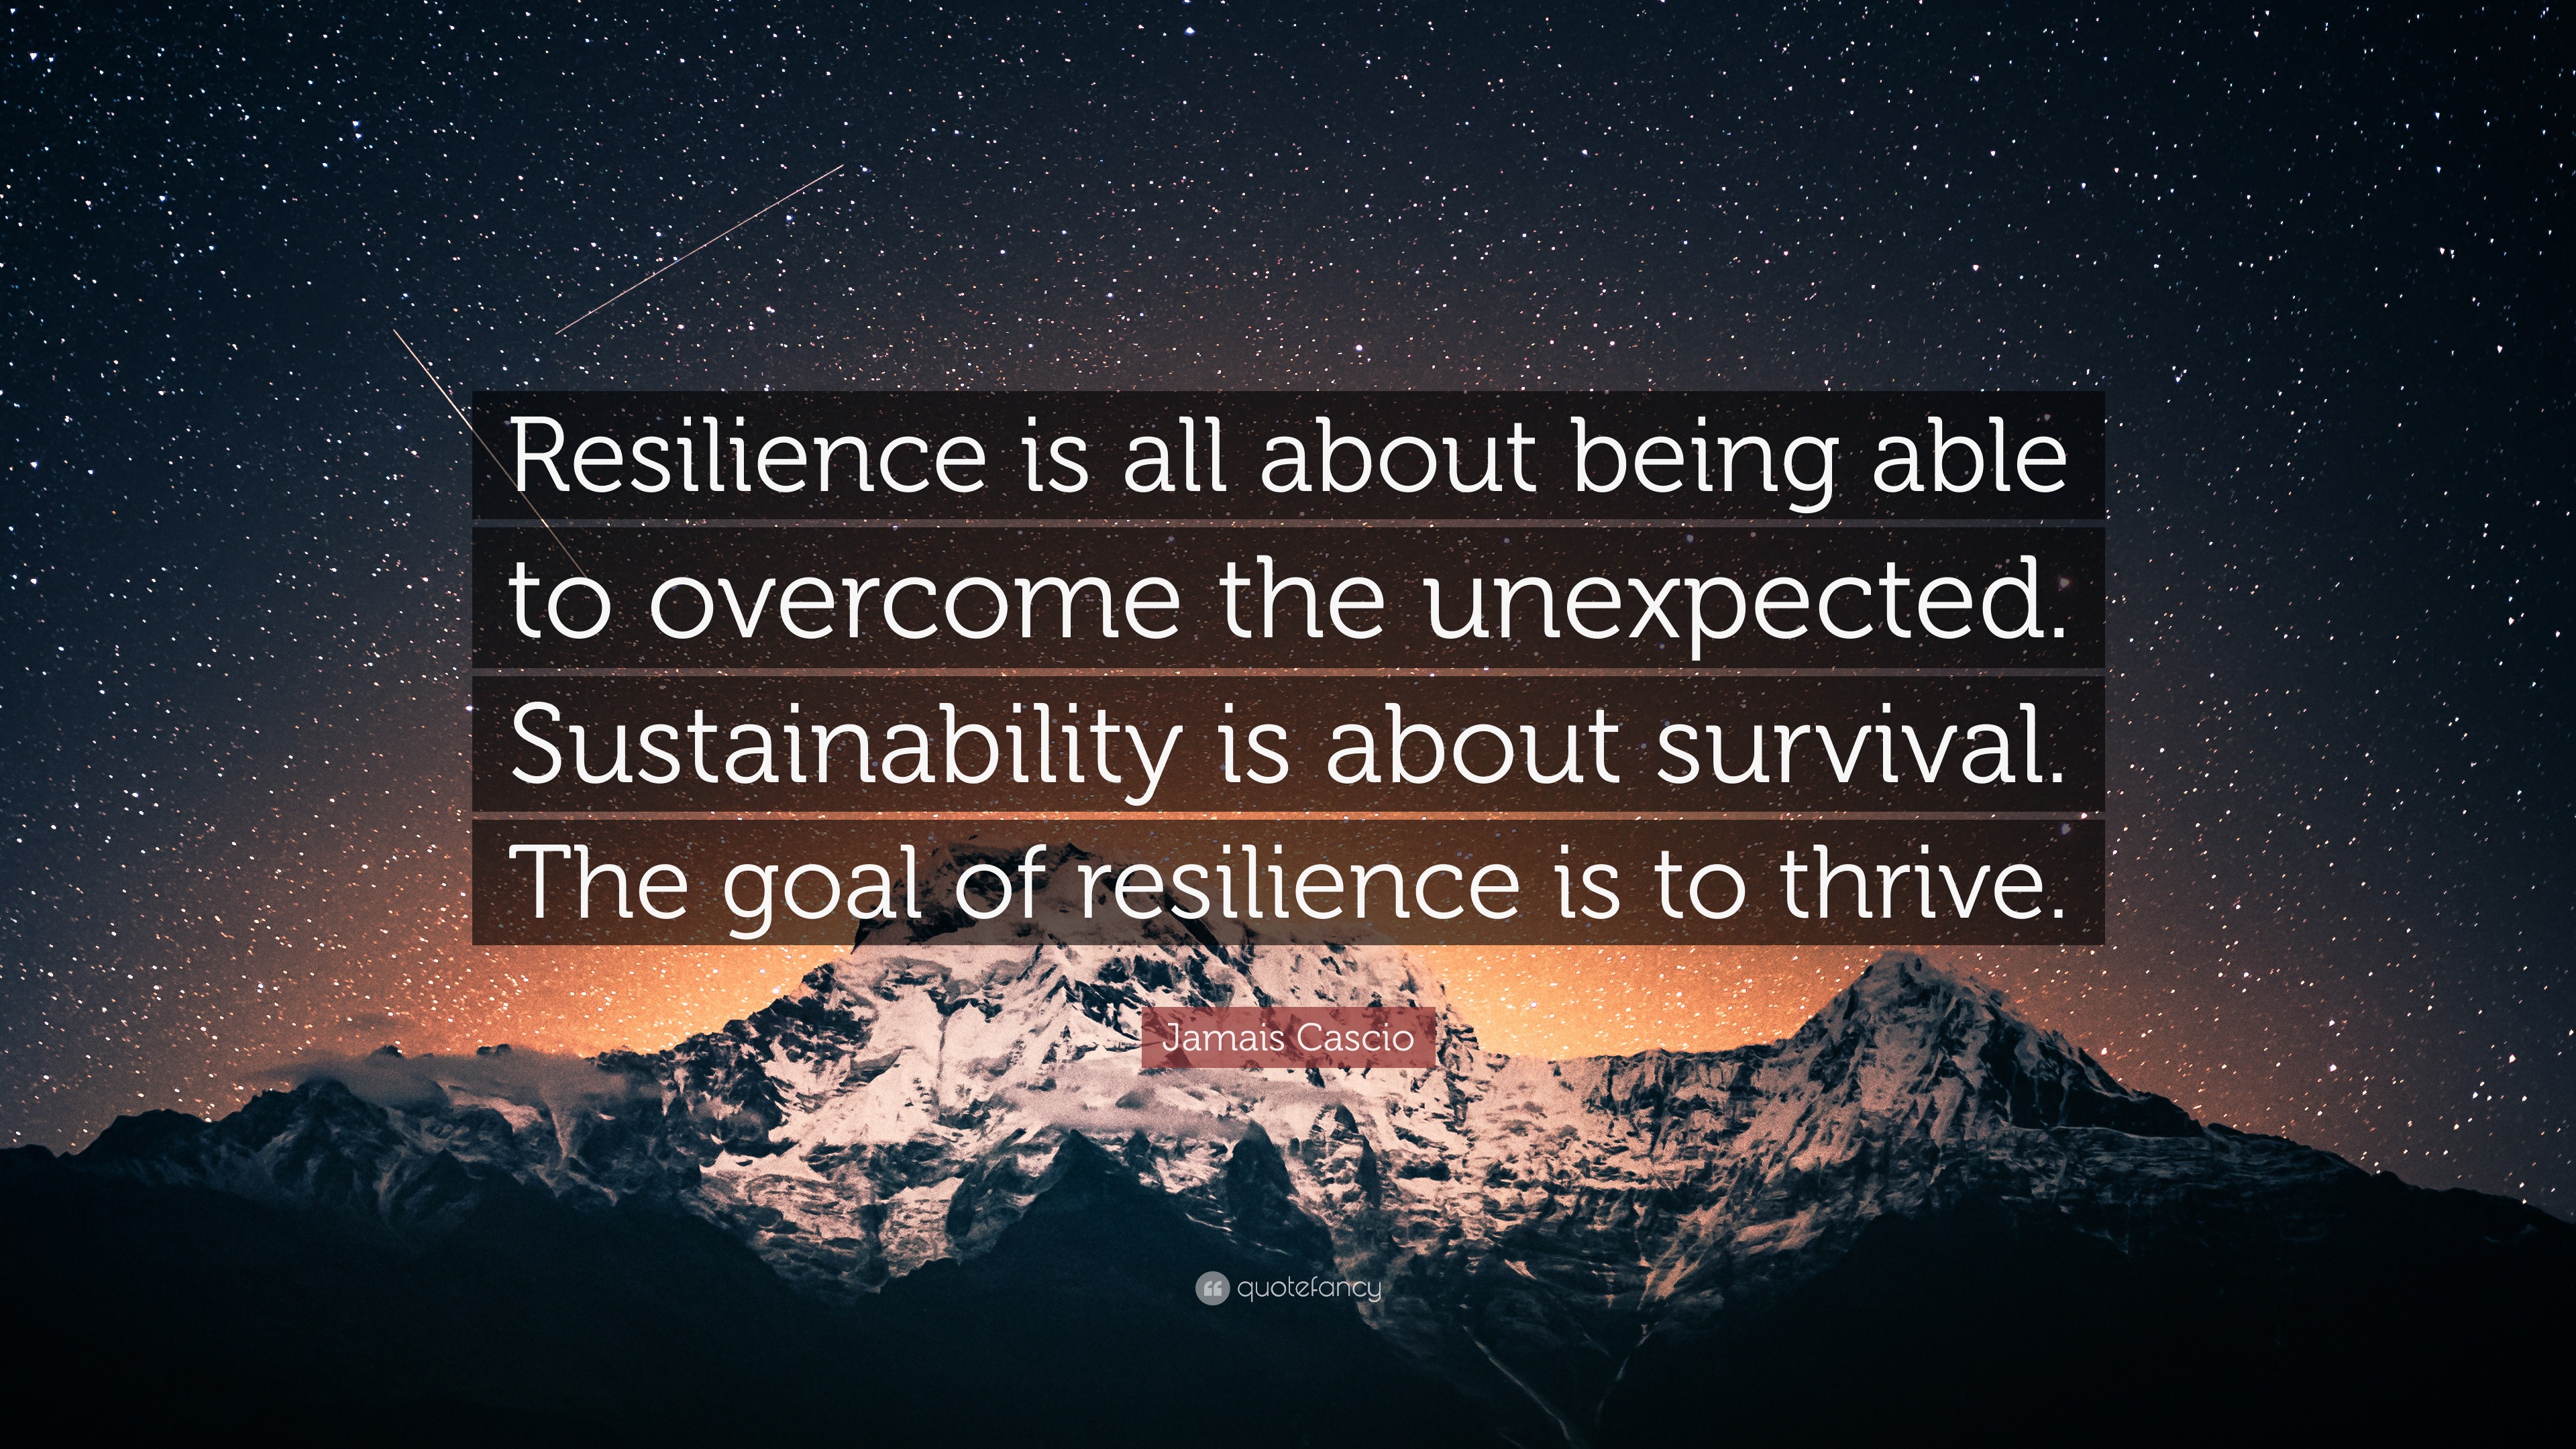 a speech about resilience